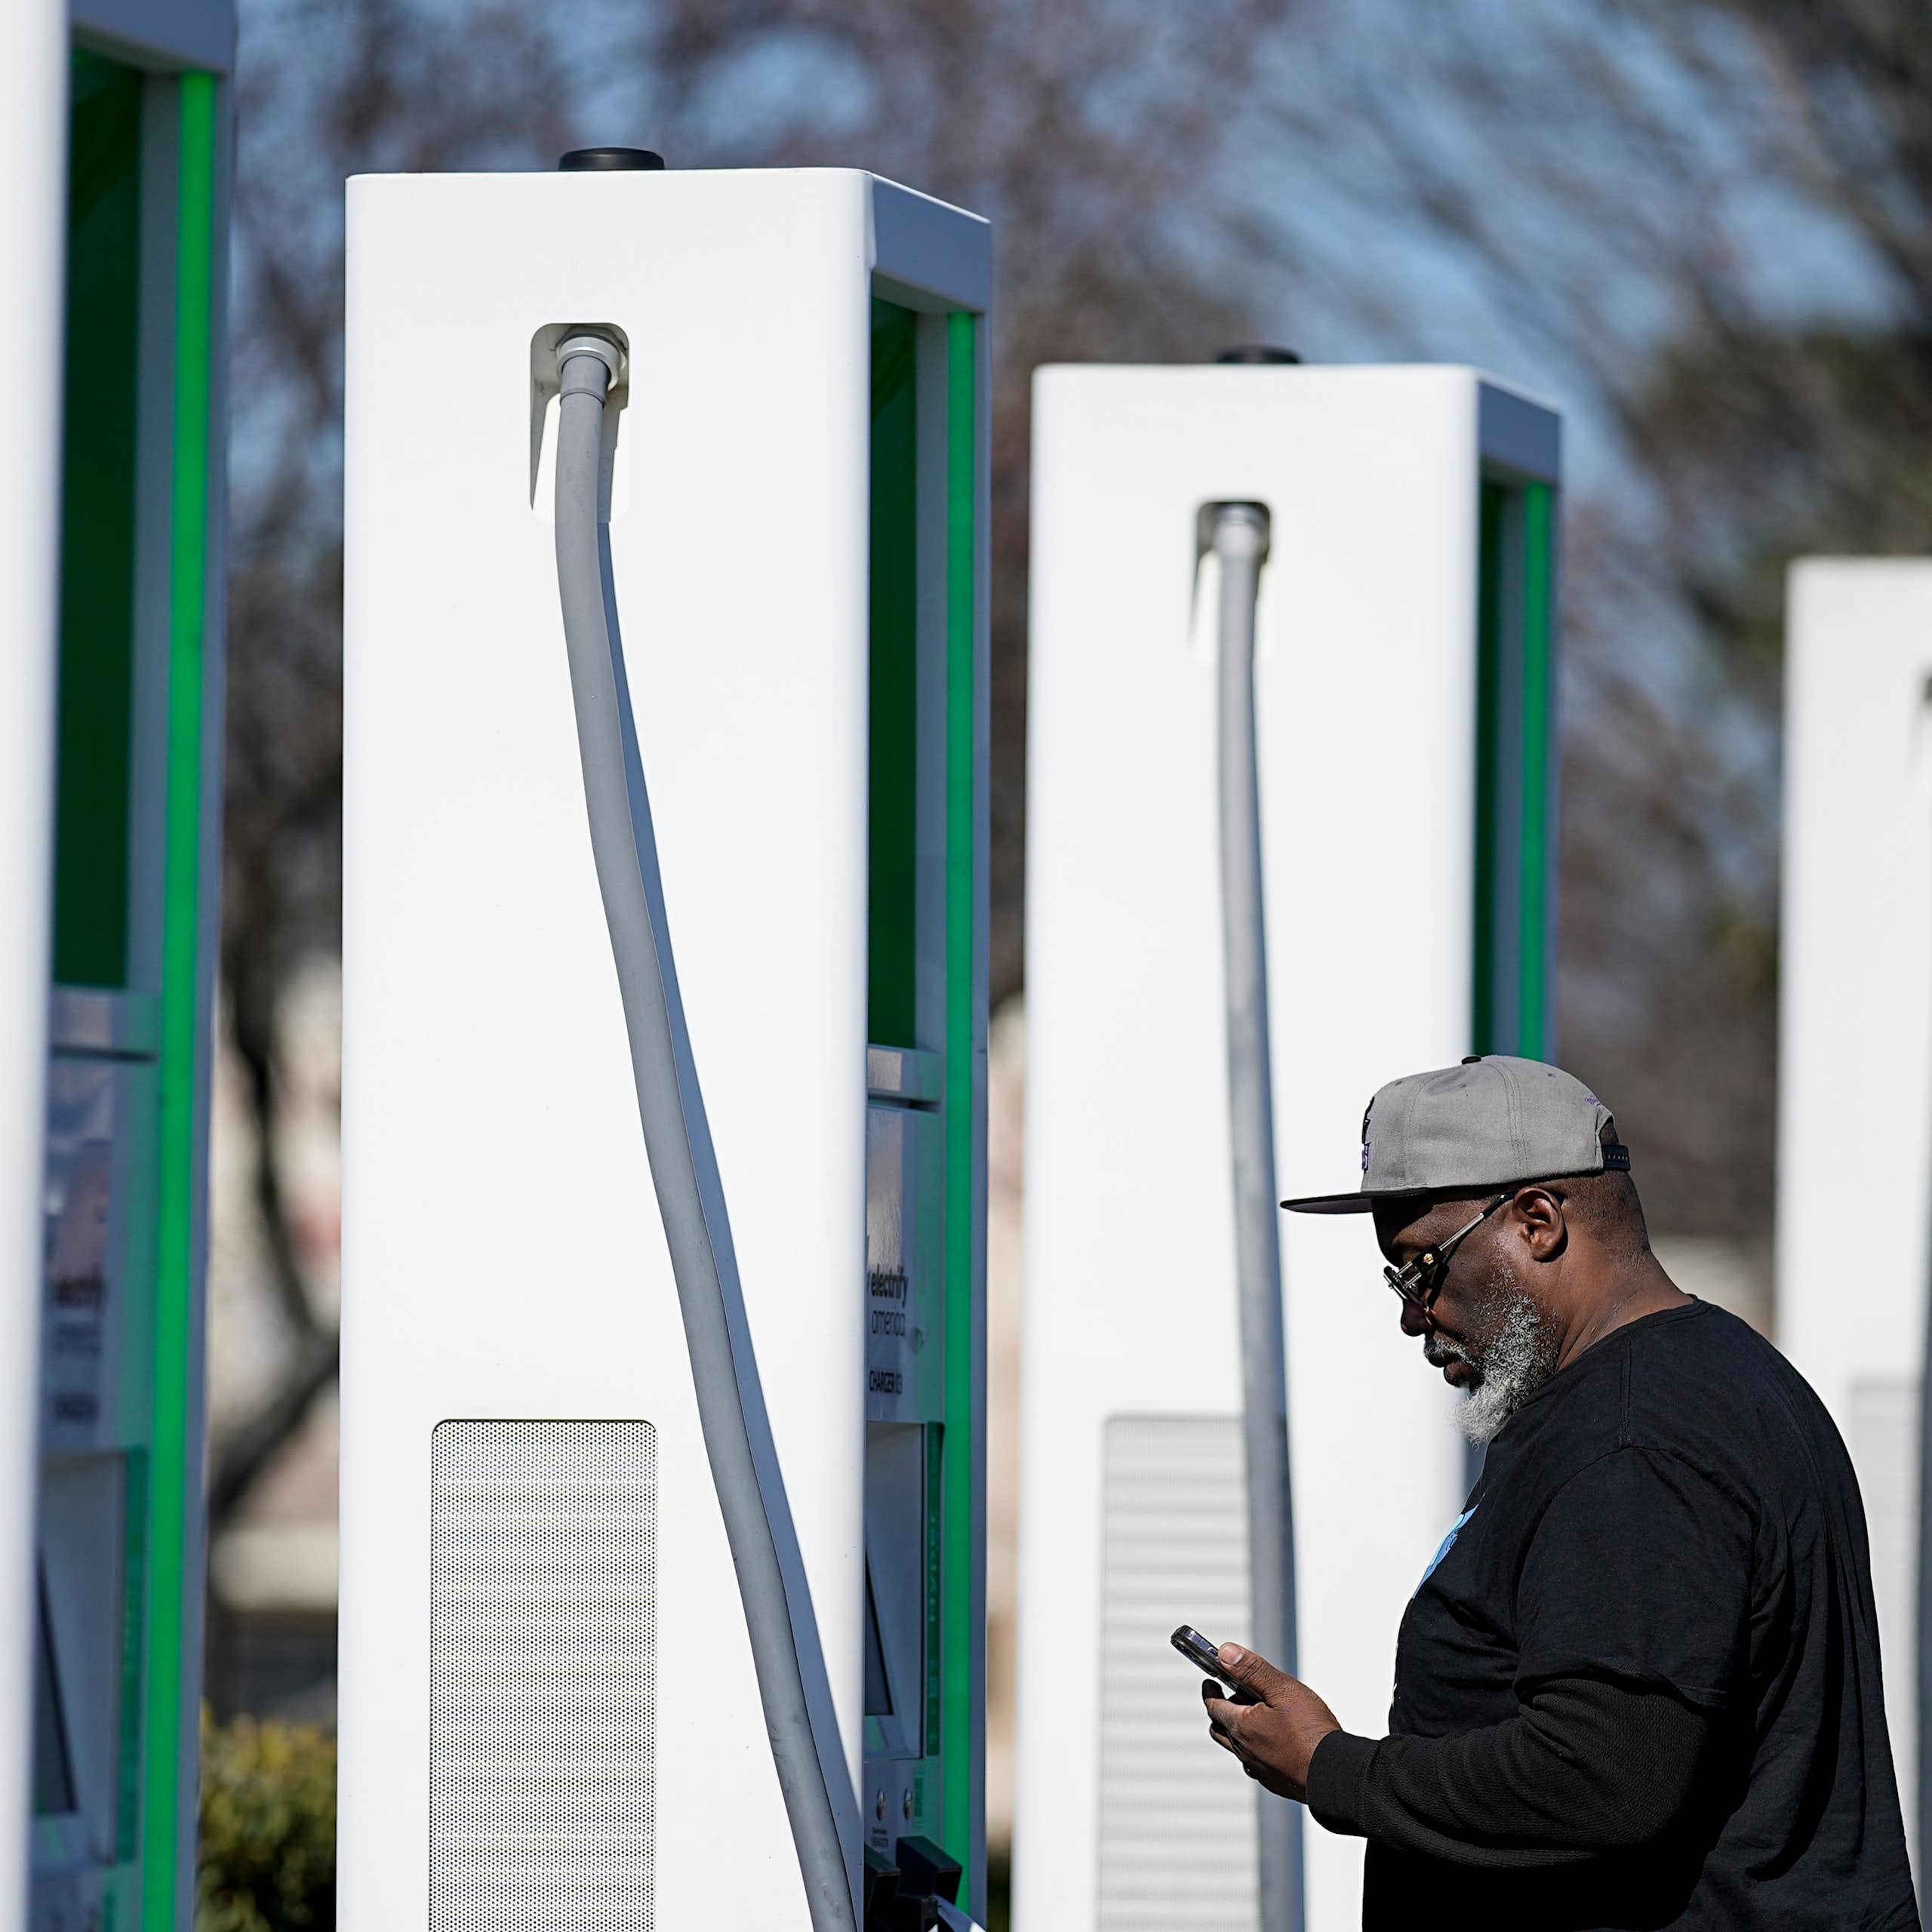 A man stands looking at his phone next to a row of EV chargers.